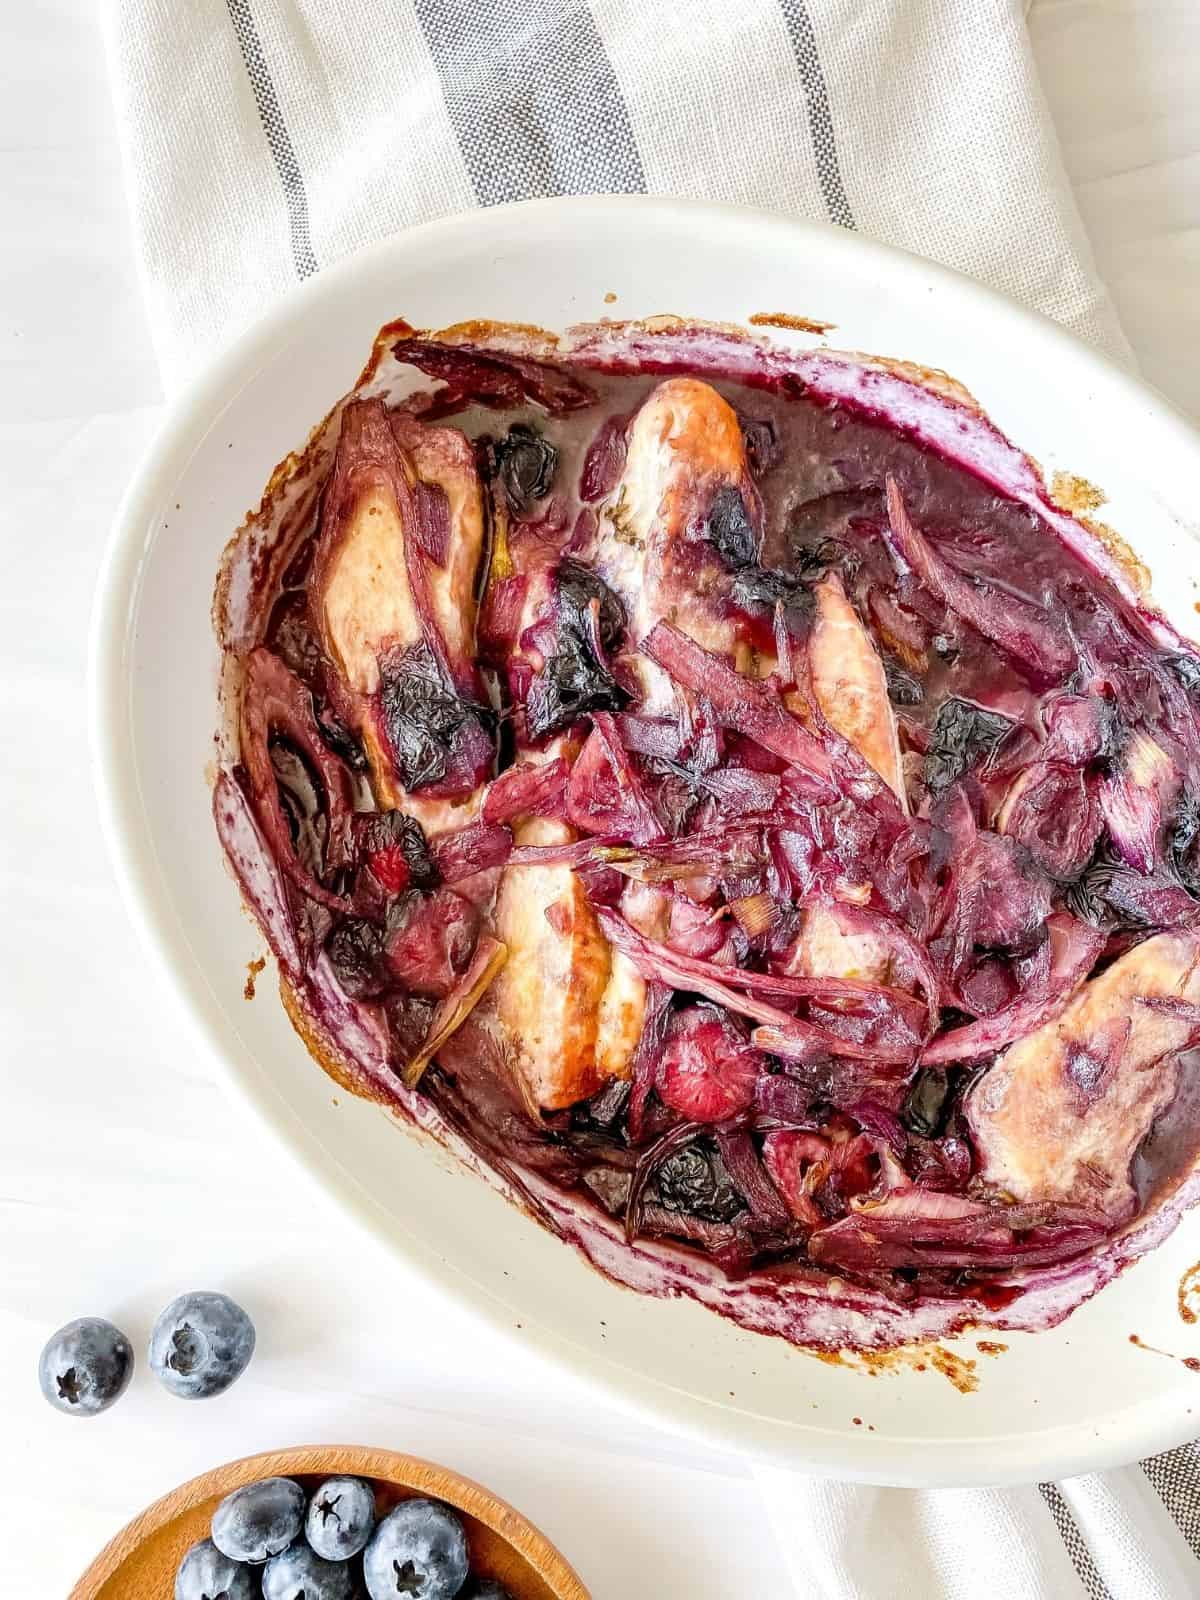 baked blueberry chicken in a white ovenproof dish next to a small plate of blueberries.